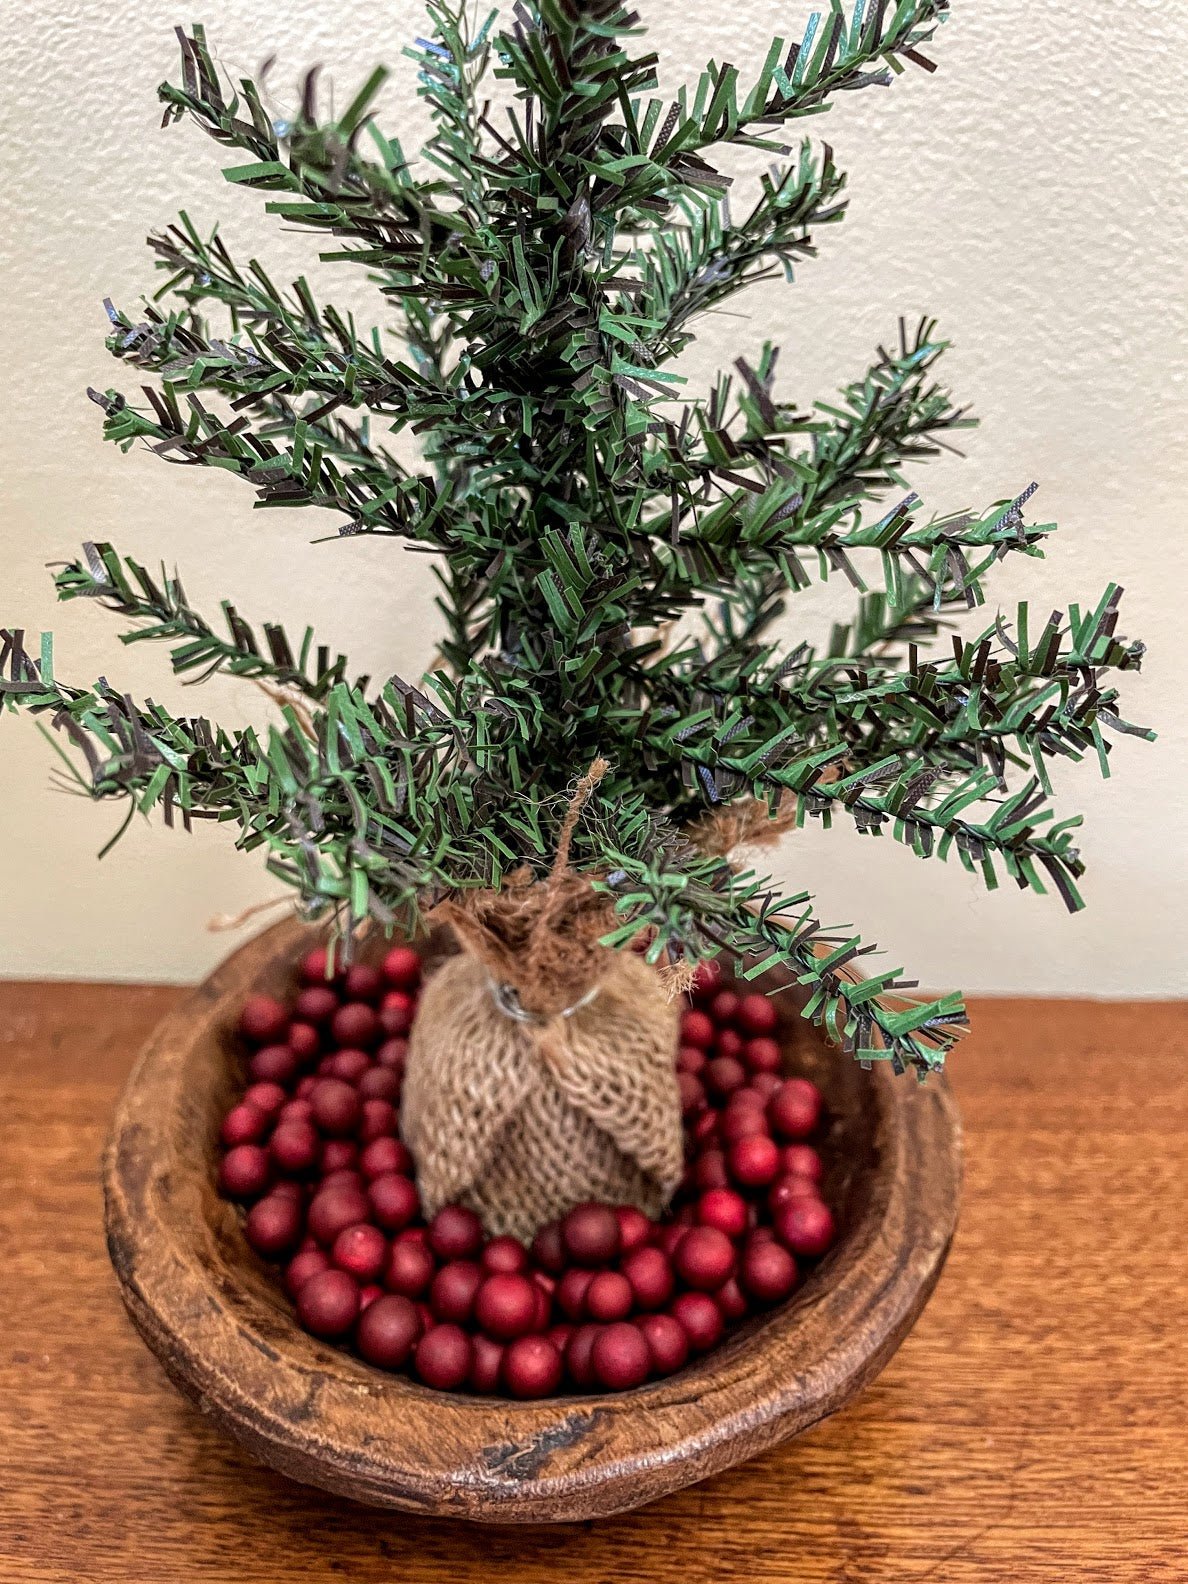 Primitive Christmas Farmhouse Hand Carved Wood Bowl w/ Pine Tree and Berries - The Primitive Pineapple Collection